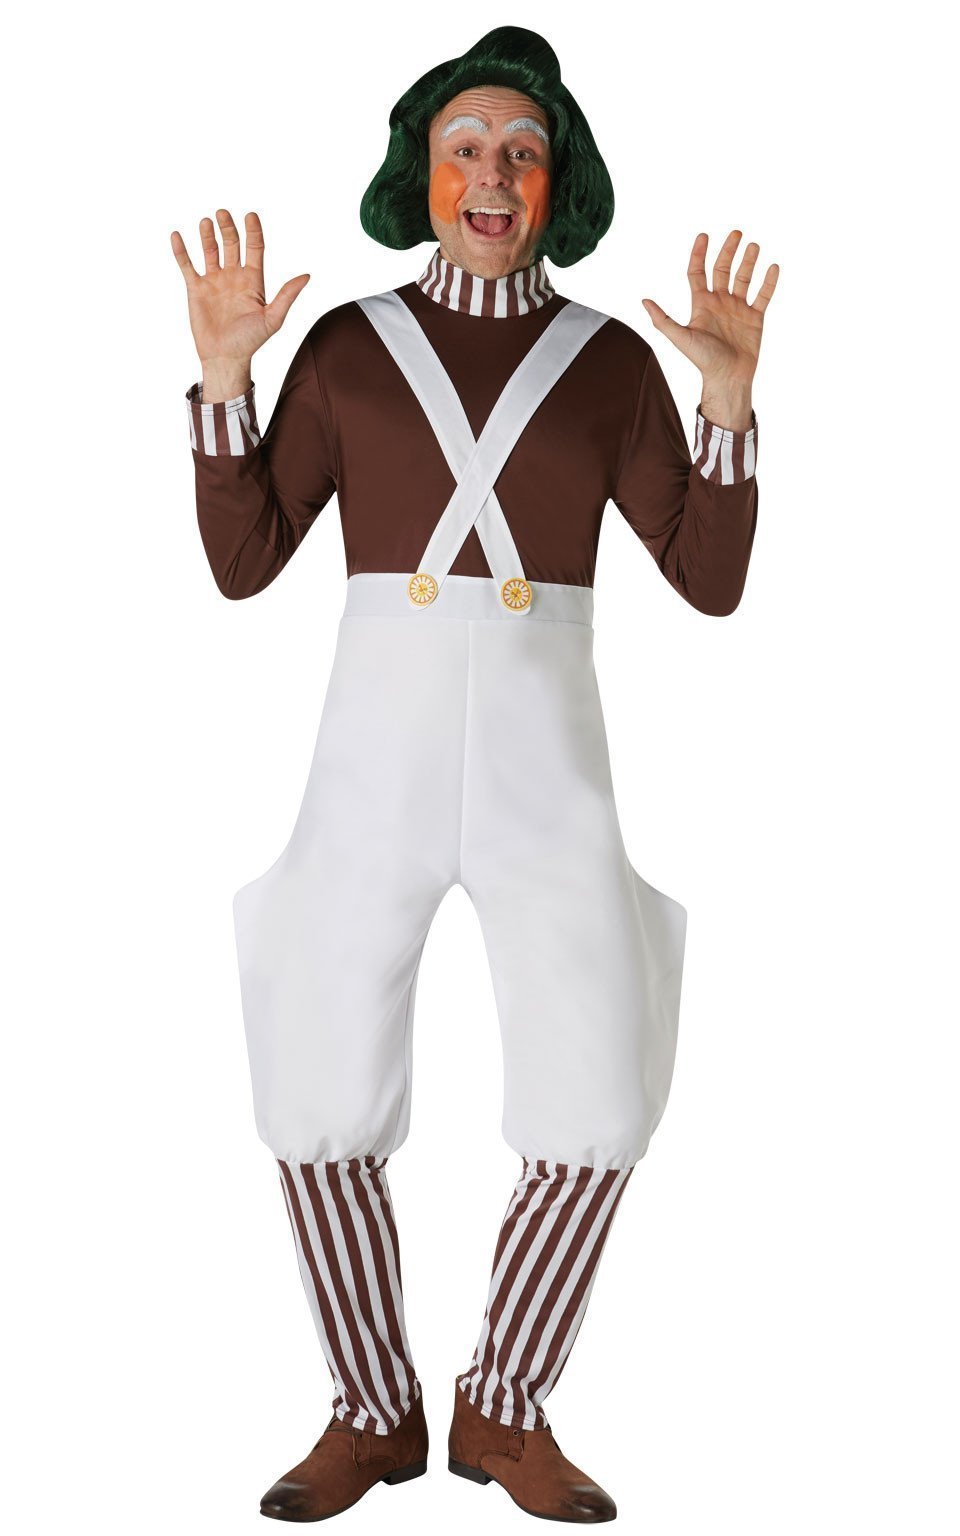 Willy Wonka Costumes & Accessories